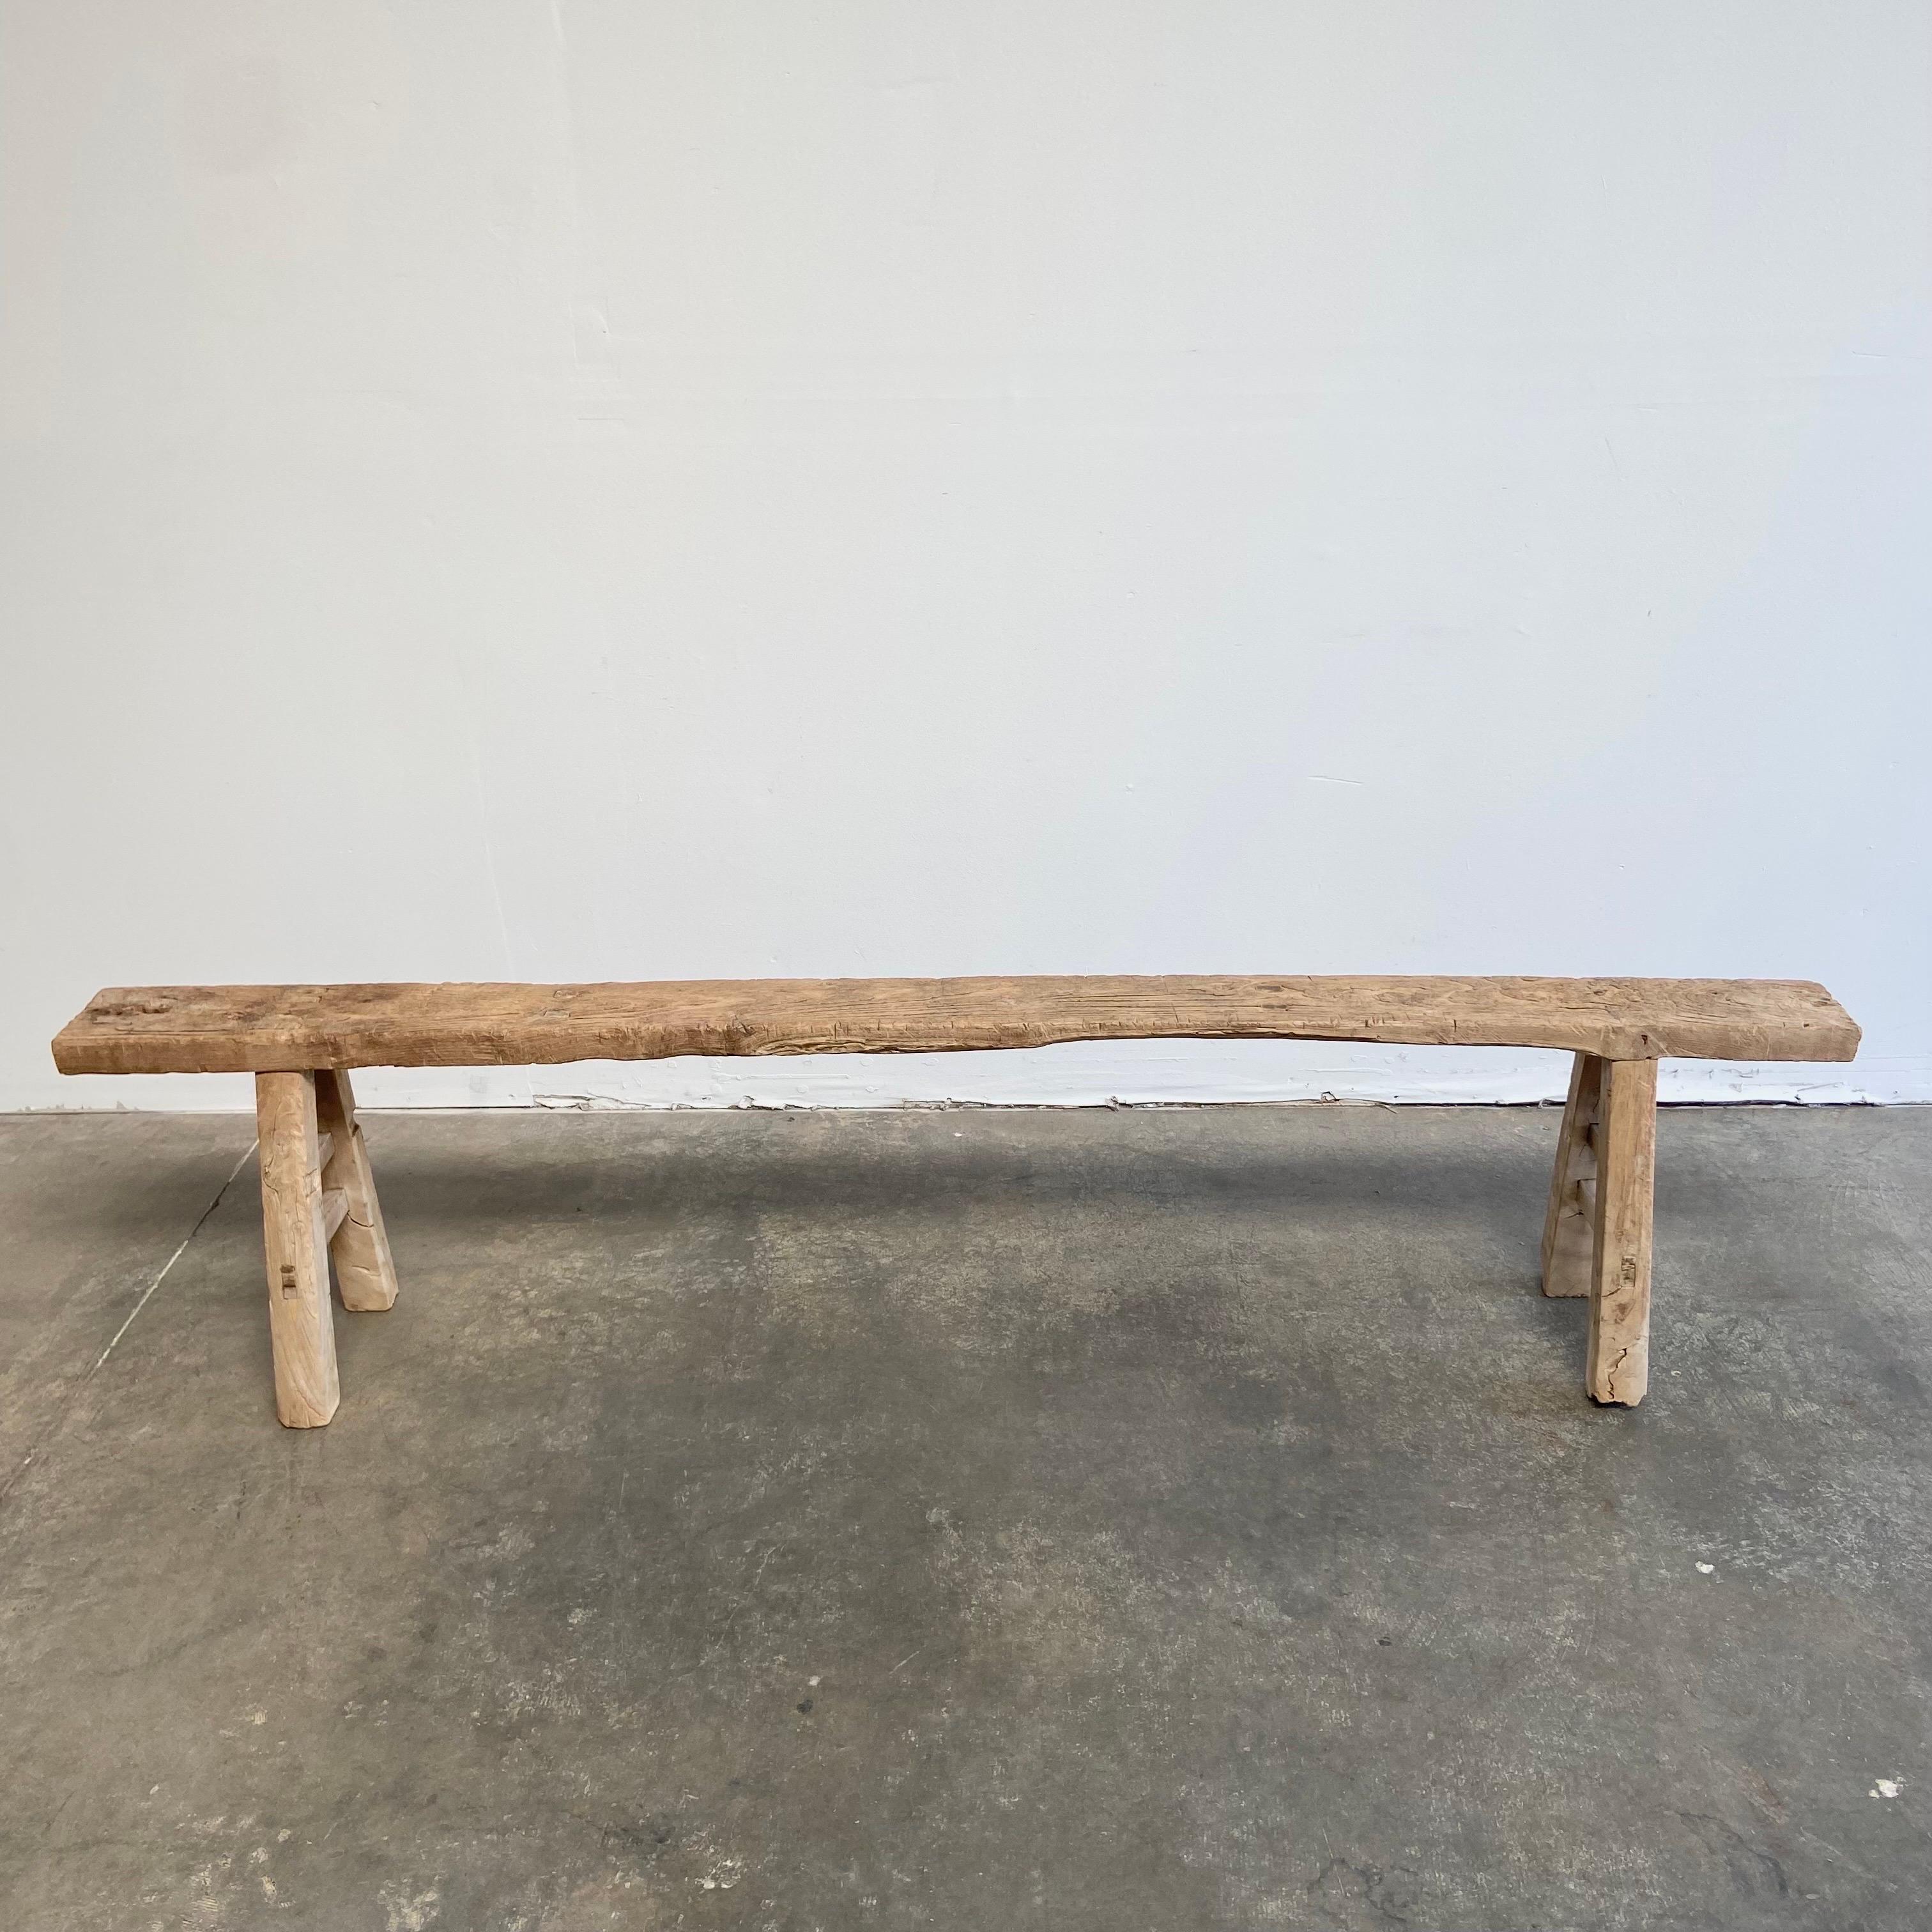 Vintage antique Elm wood bench These are the real vintage antique elm wood benches! Beautiful antique patina, with weathering and age, these are solid and sturdy ready for daily use, use as as a table behind a sofa, stool, coffee table, they are